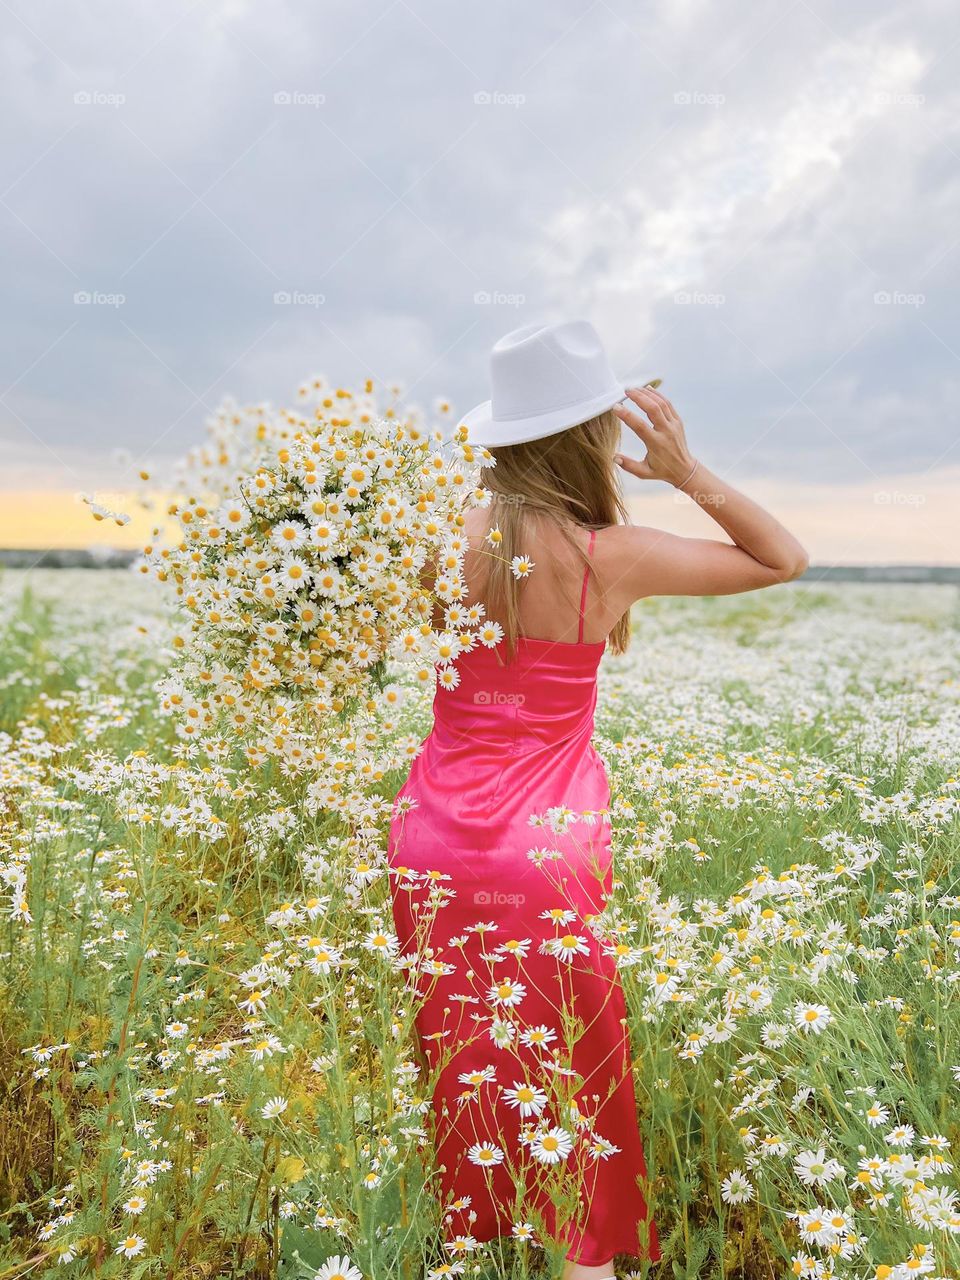 girl walking in the field with a bouquet of flowers